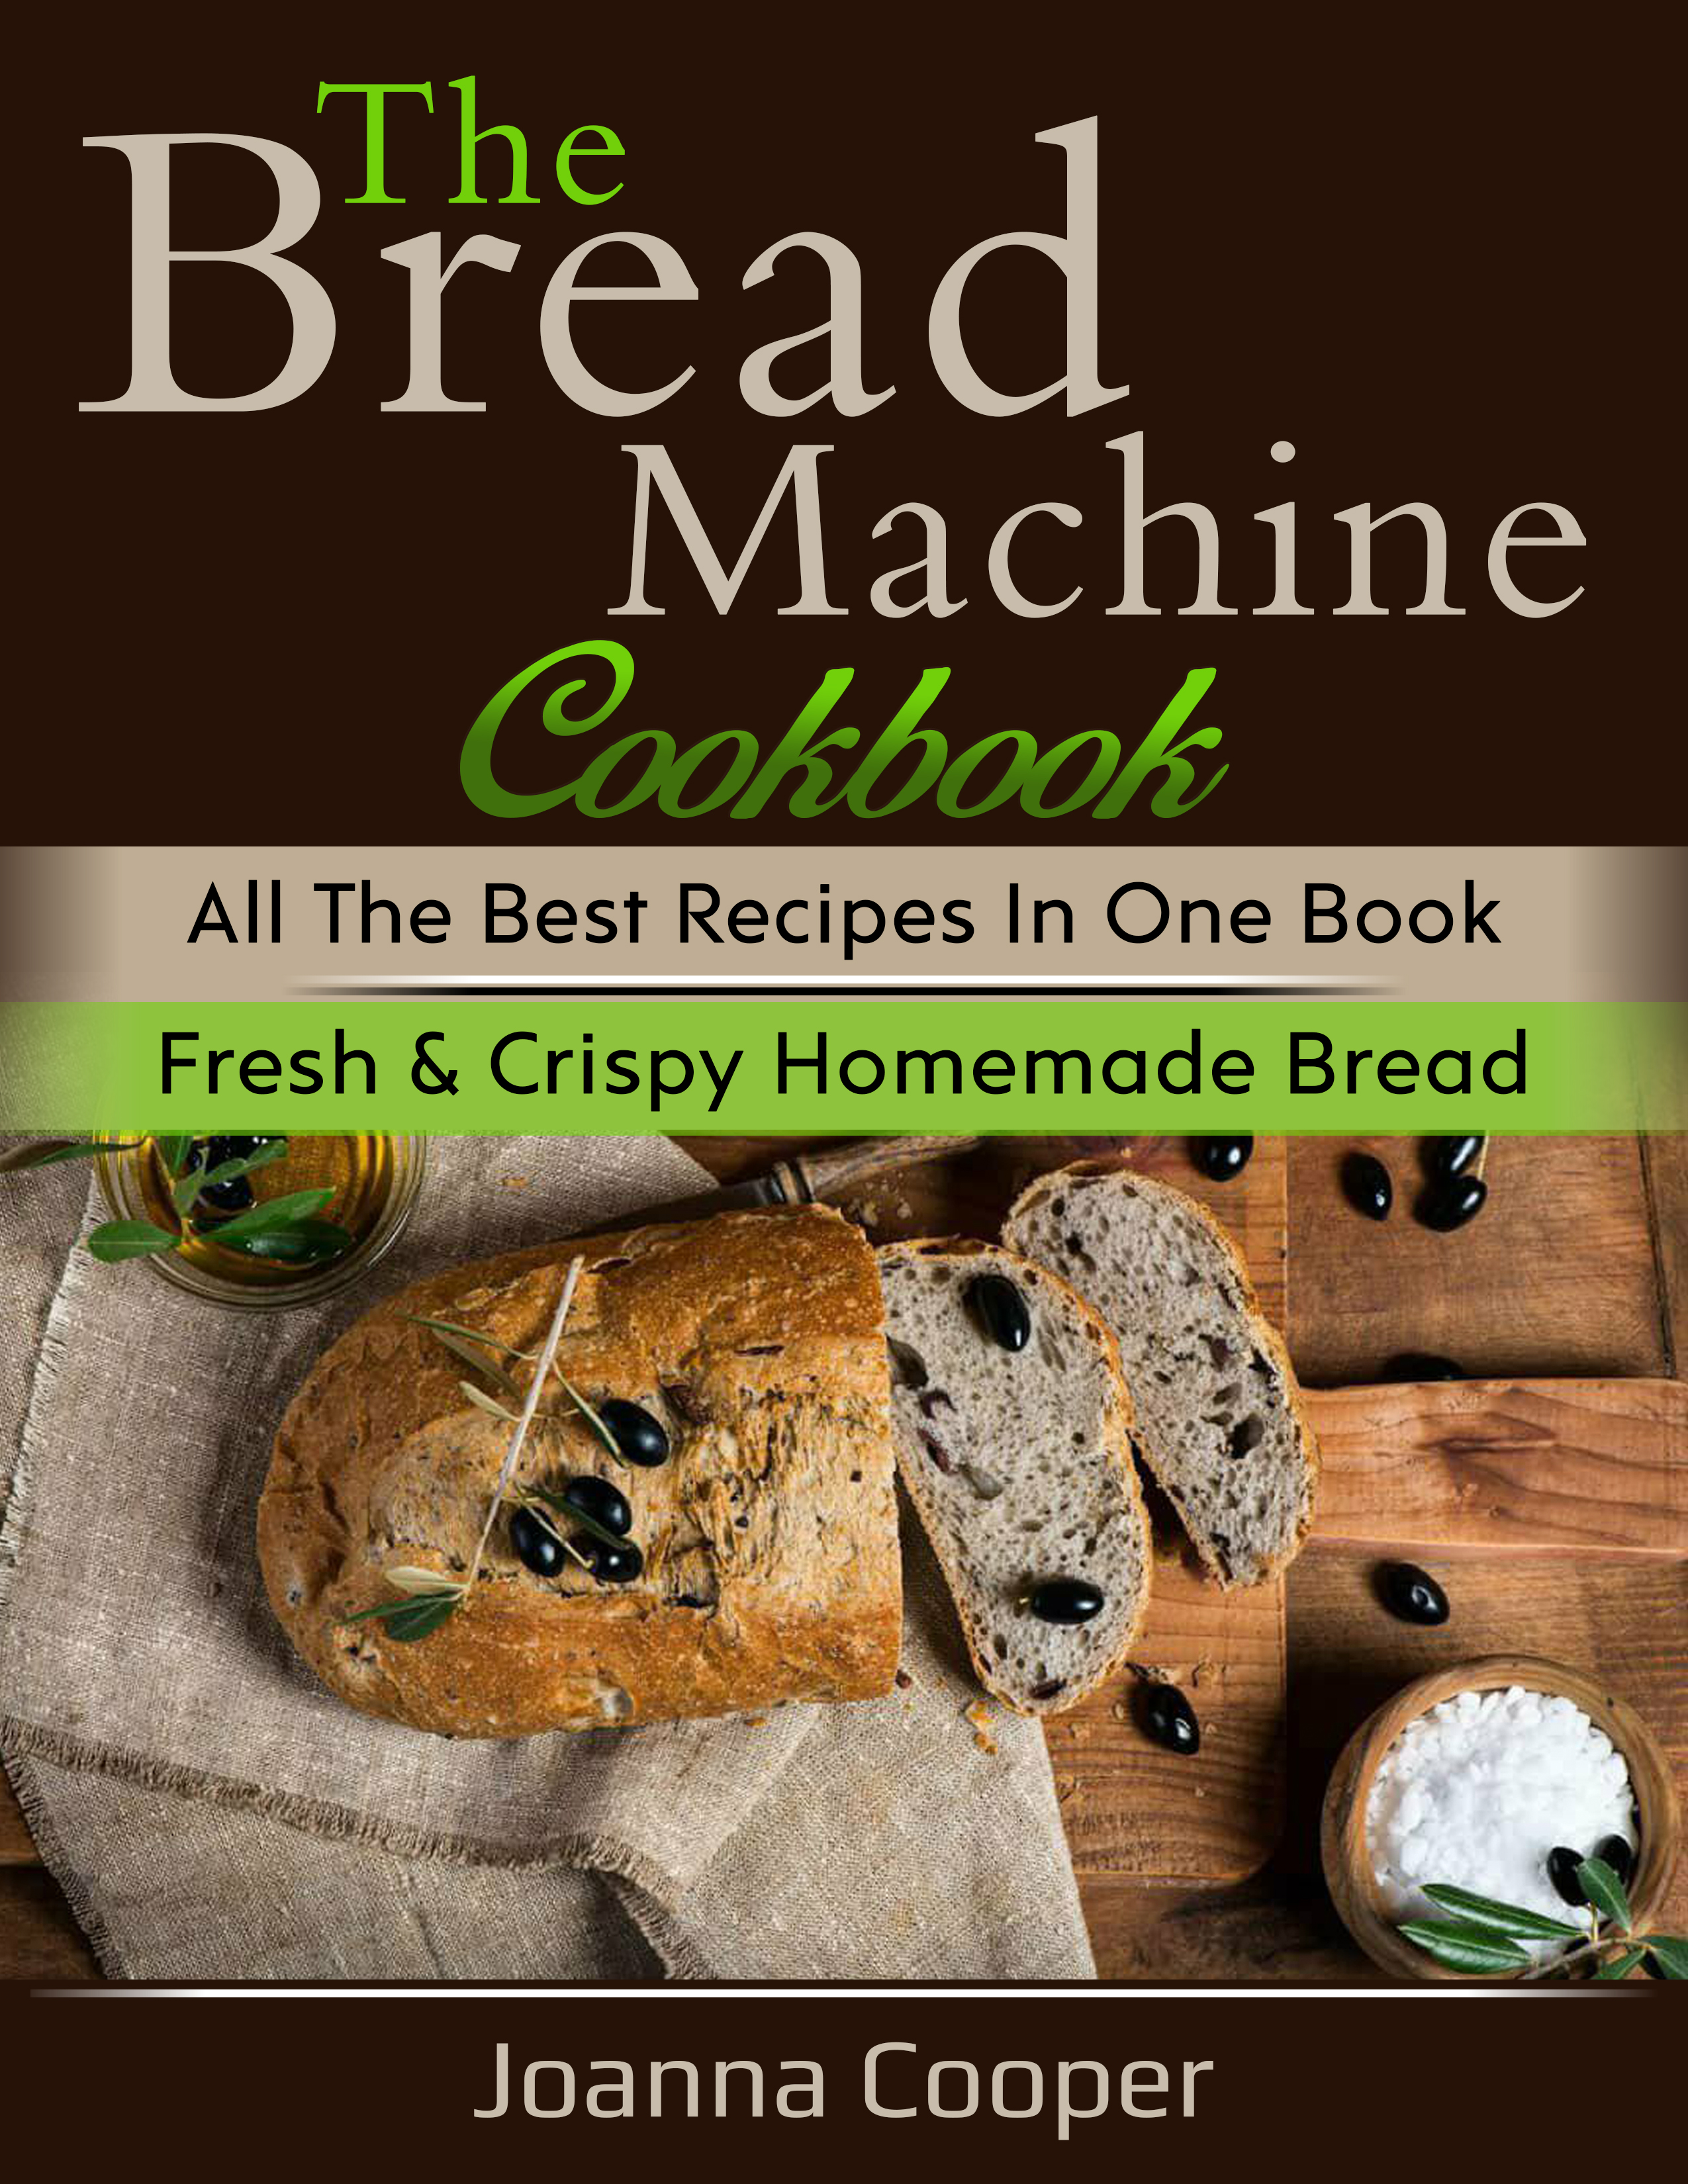 FREE: The Bread Machine Cookbook: All the Best Recipes in One Book Fresh & Crispy Homemade Bread by Joanna Cooper